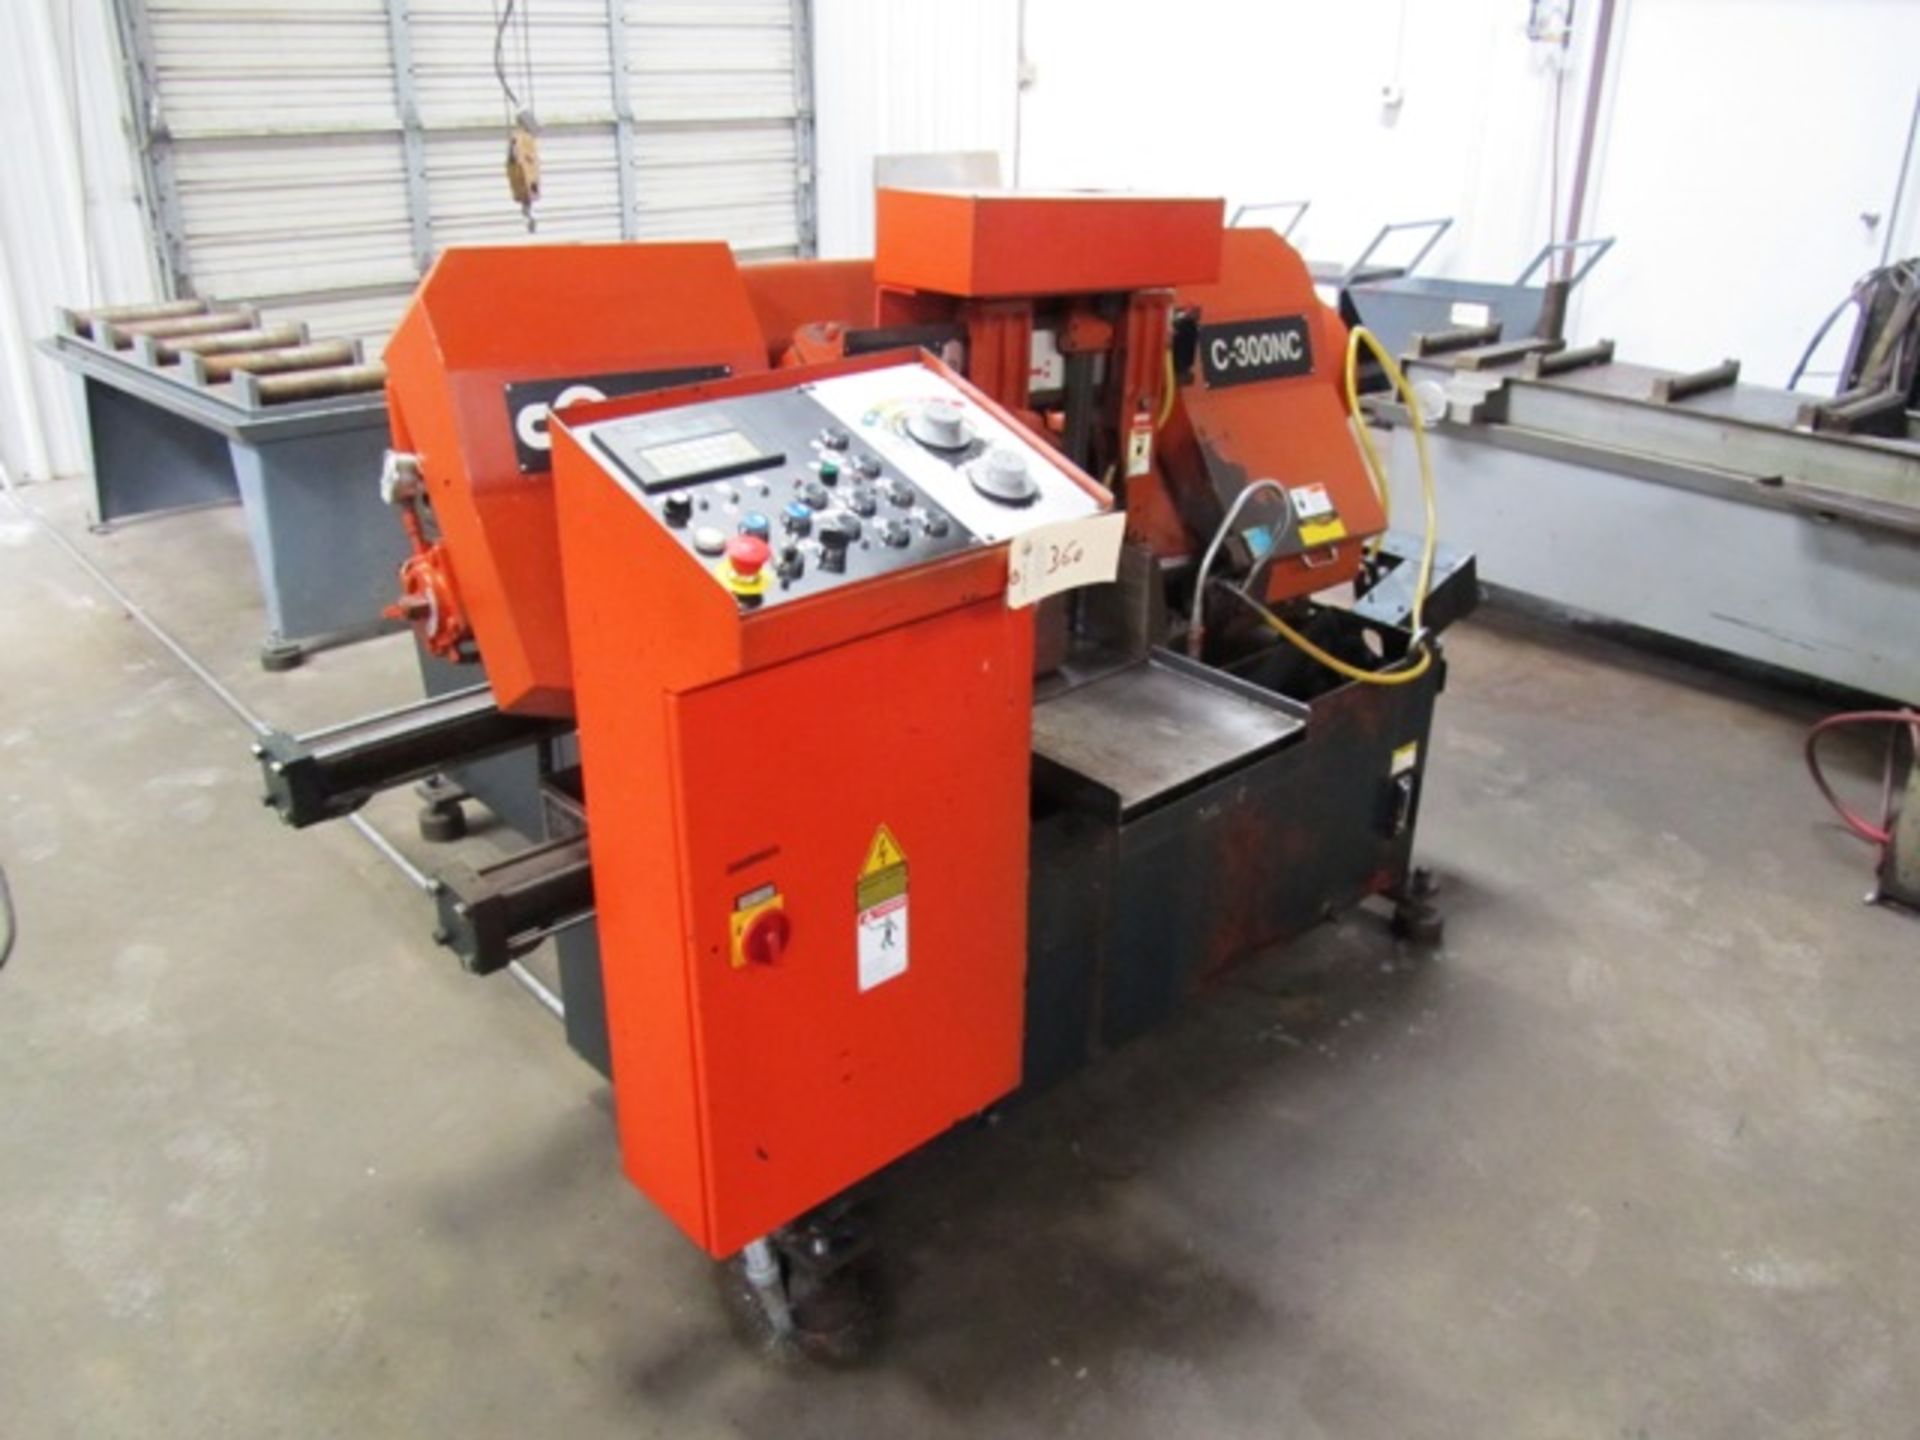 Cosen Model C-300NC Automatic Horizontal Bandsaw with 11.8'' x 13'' Capacity, 11.8'' Rounds, - Image 2 of 3